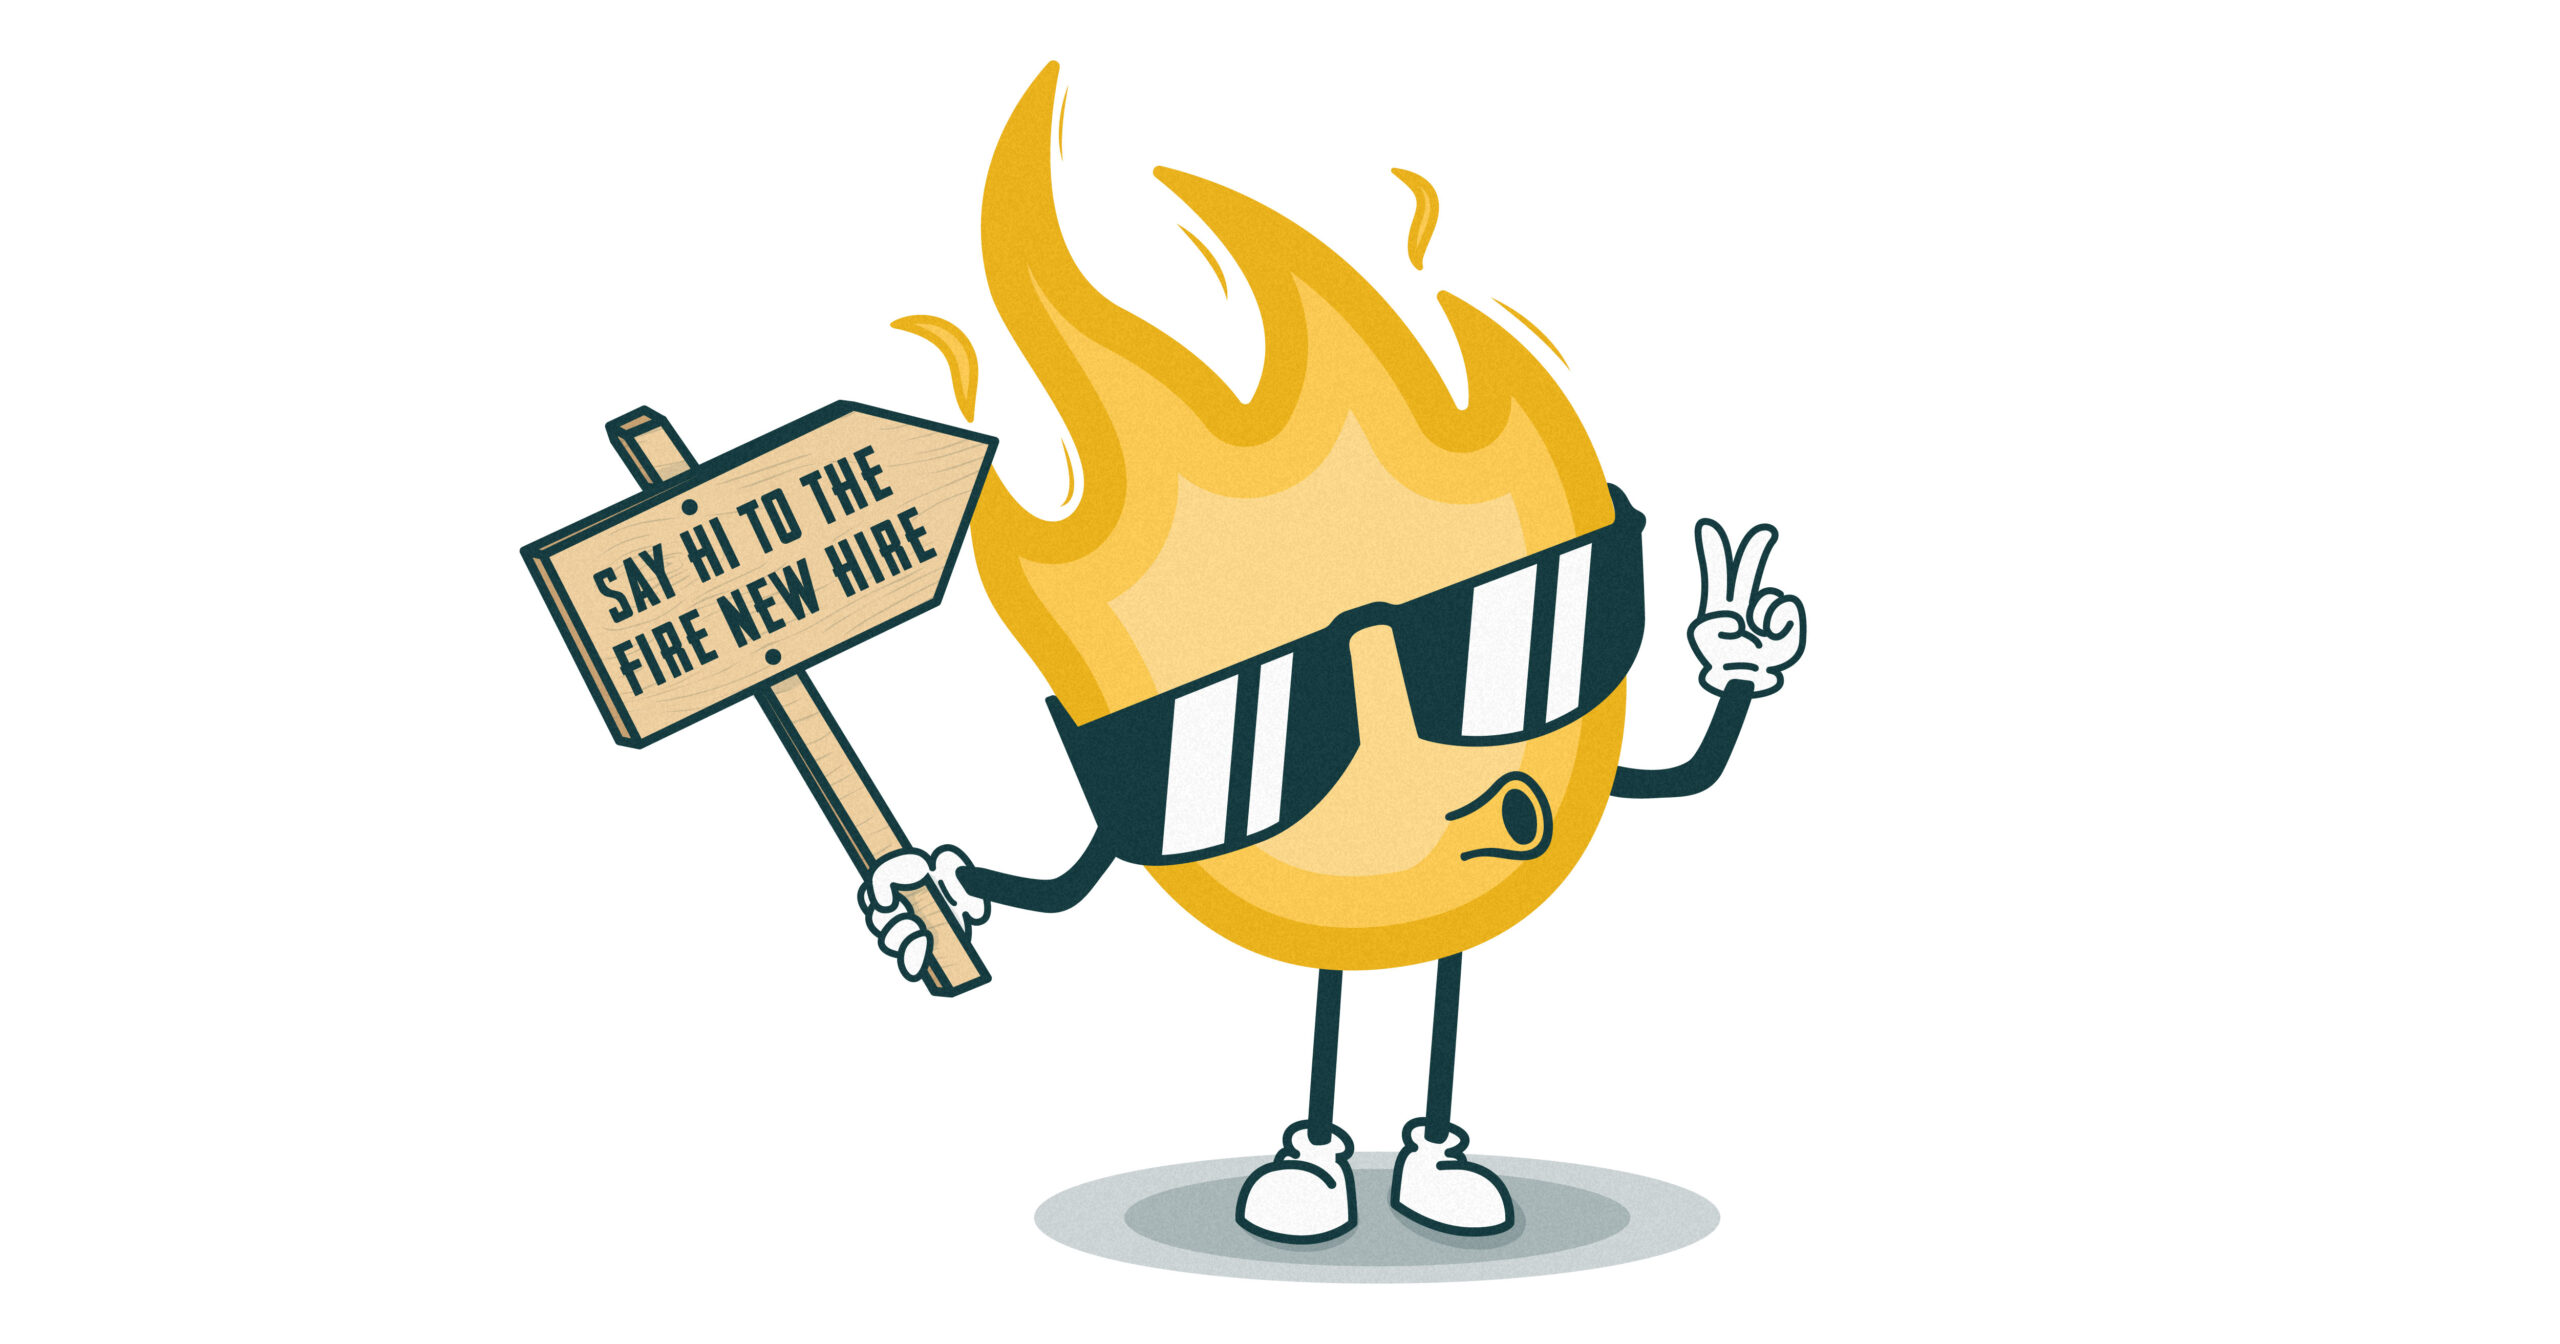 Cartoon flame holding a peace sign on hand and a sign reading " say hi to the fire new hire"